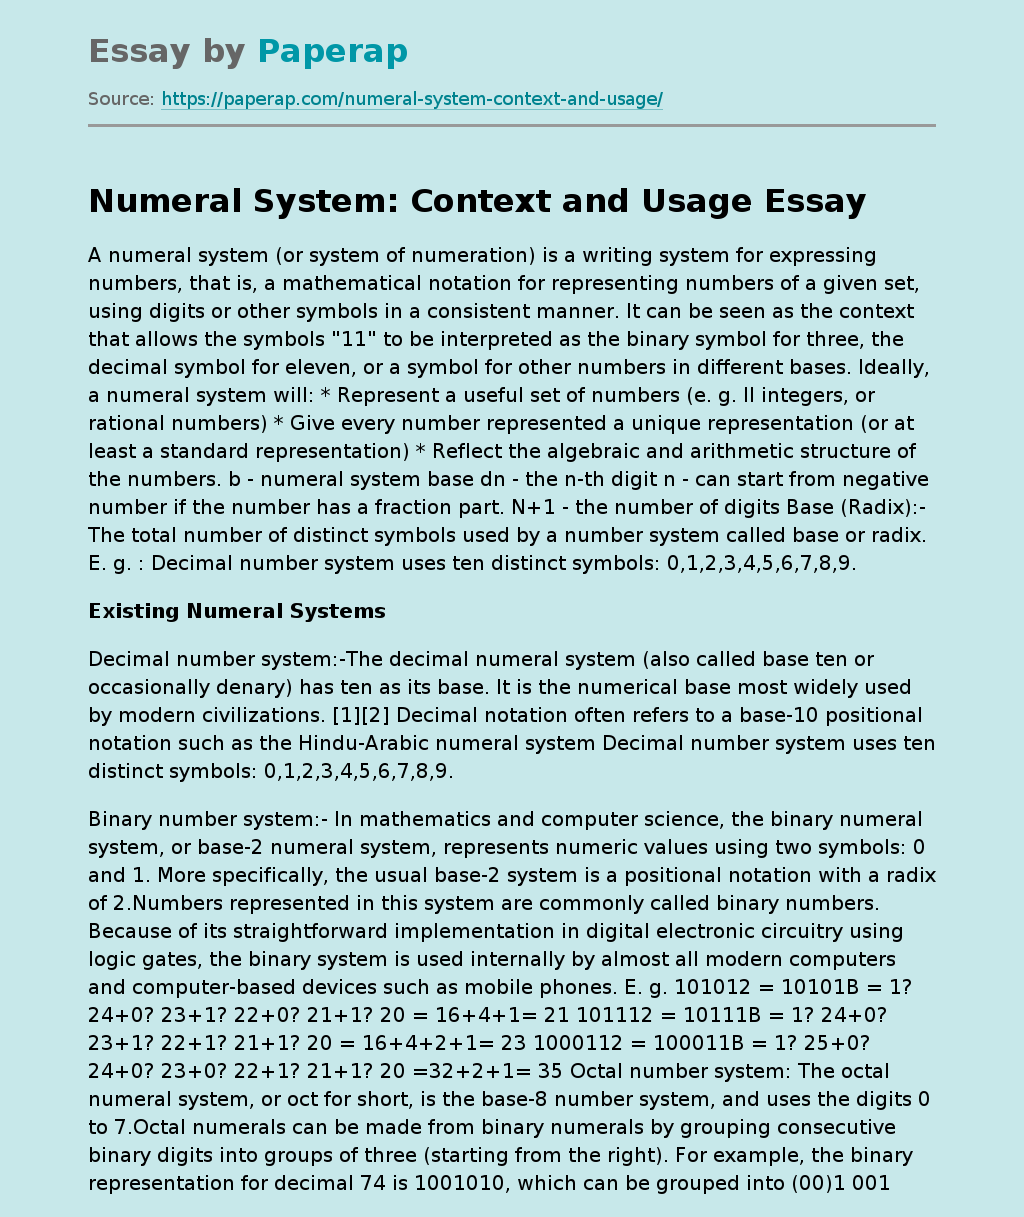 Numeral System: Context and Usage